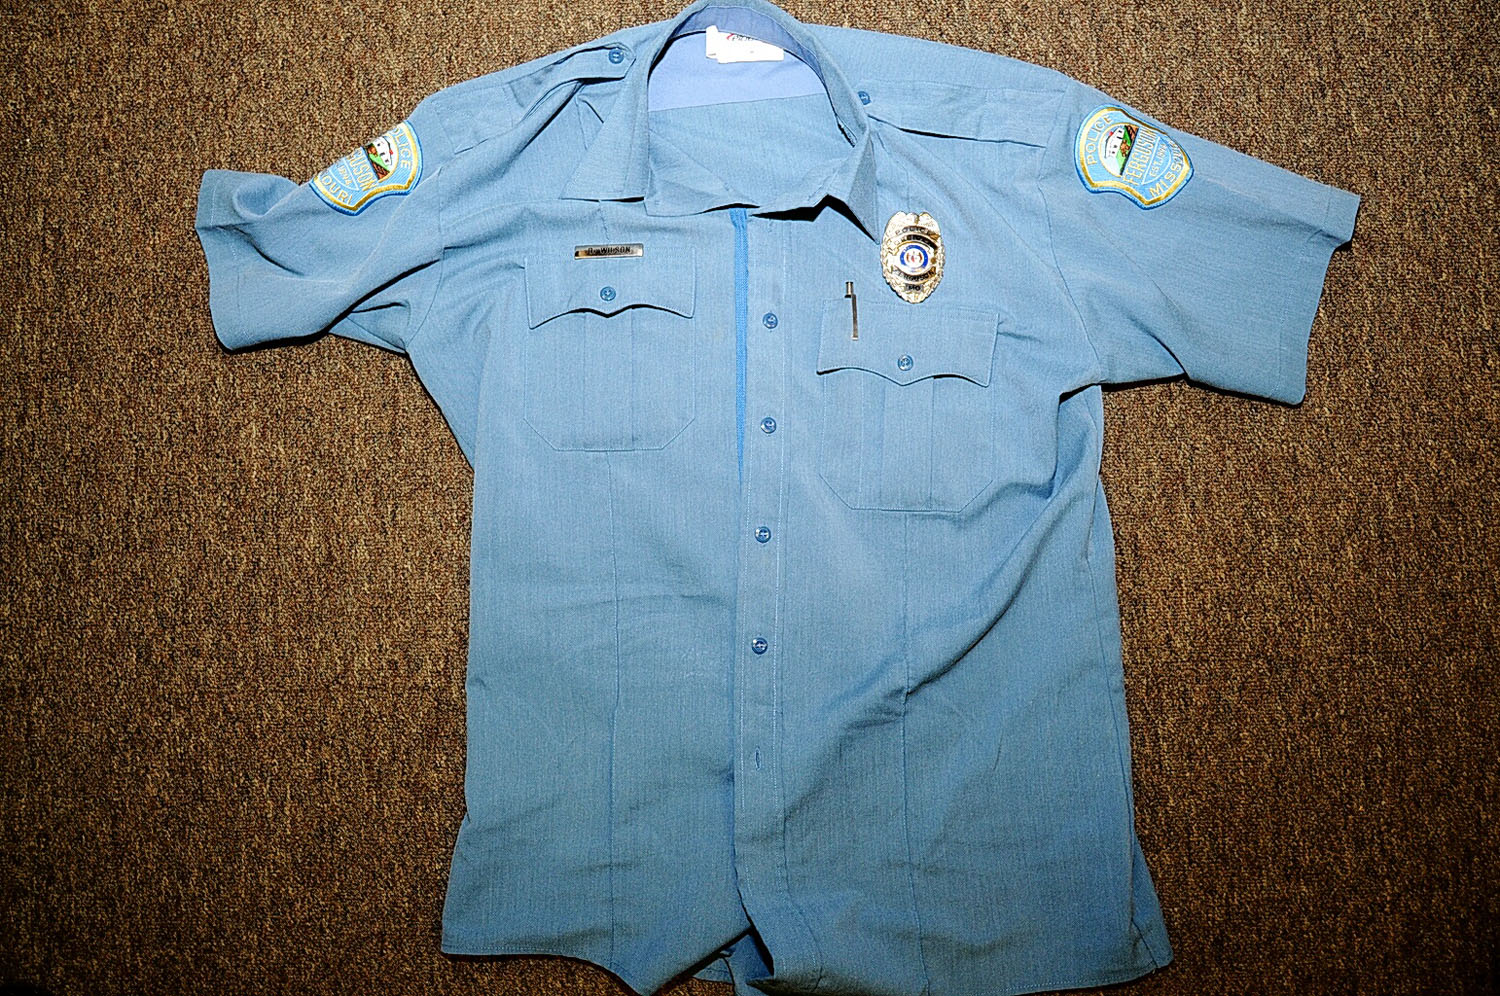 An undated evidence photograph made available by the St. Louis County prosecutors office on Nov. 25, 2014 shows Ferguson police officer Darren Wilson's uniform taken after the shooting of Michael Brown.